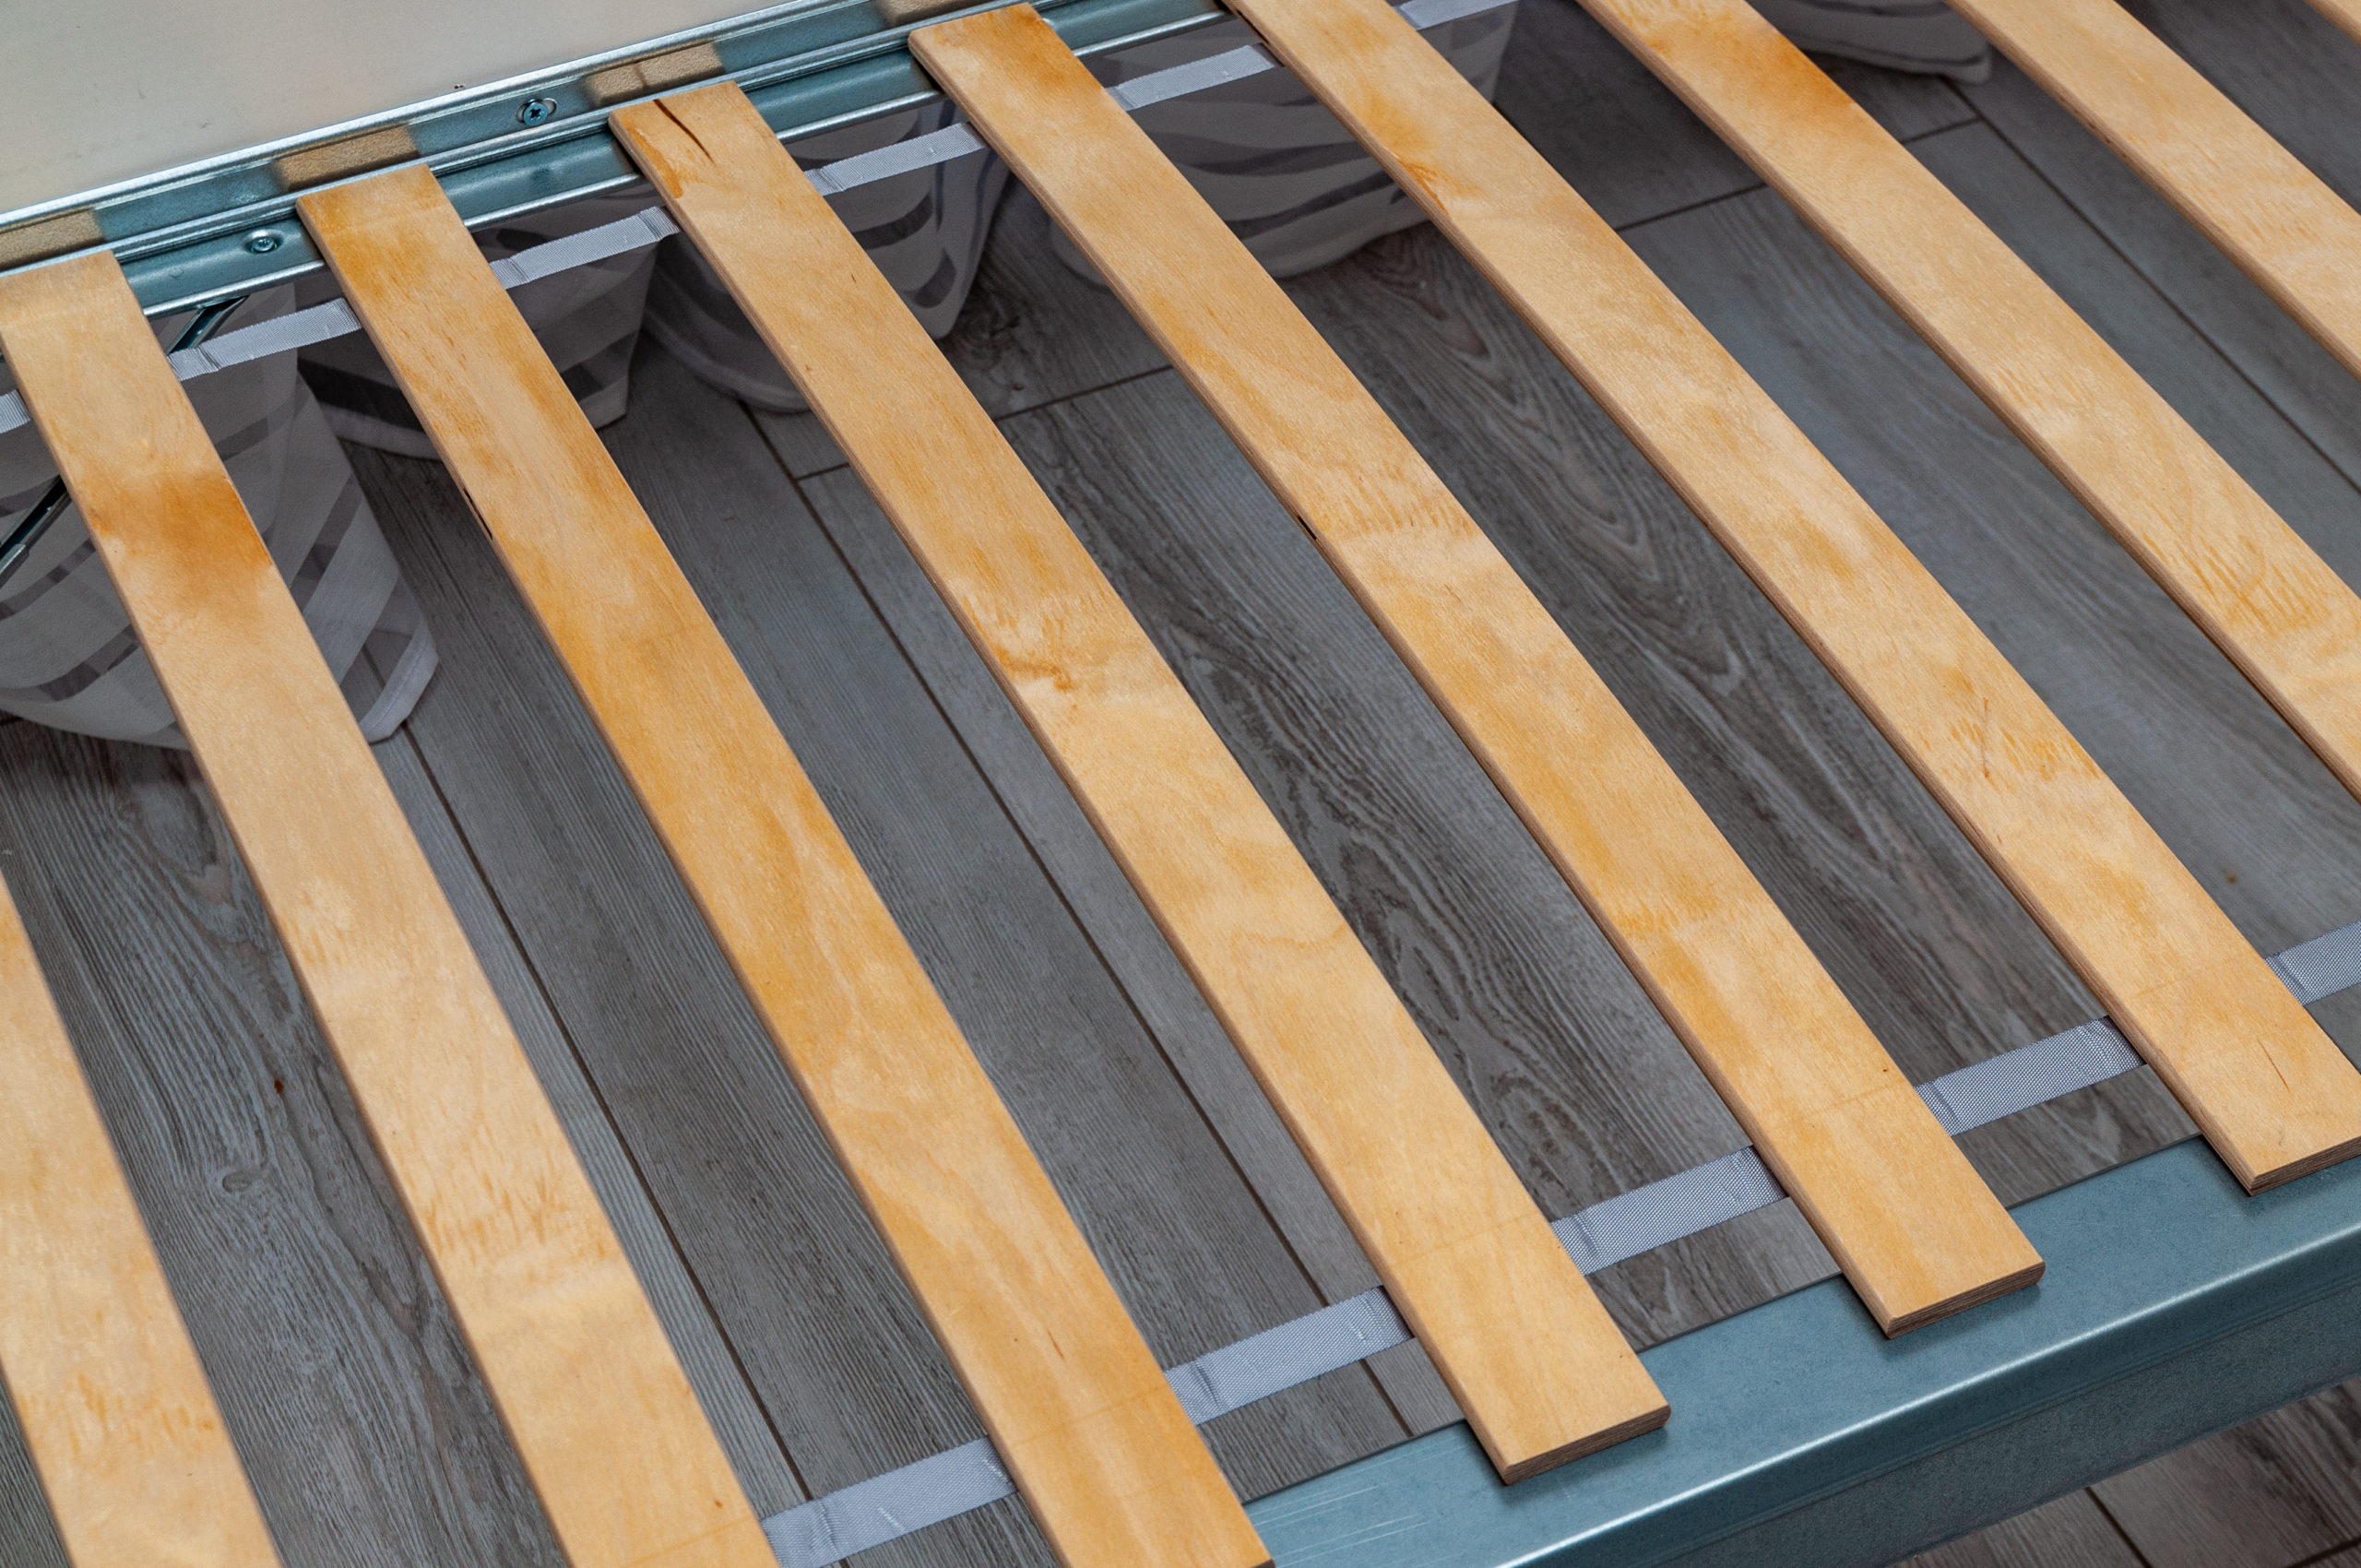 Birch Slats on the Metal Frame of the Bed